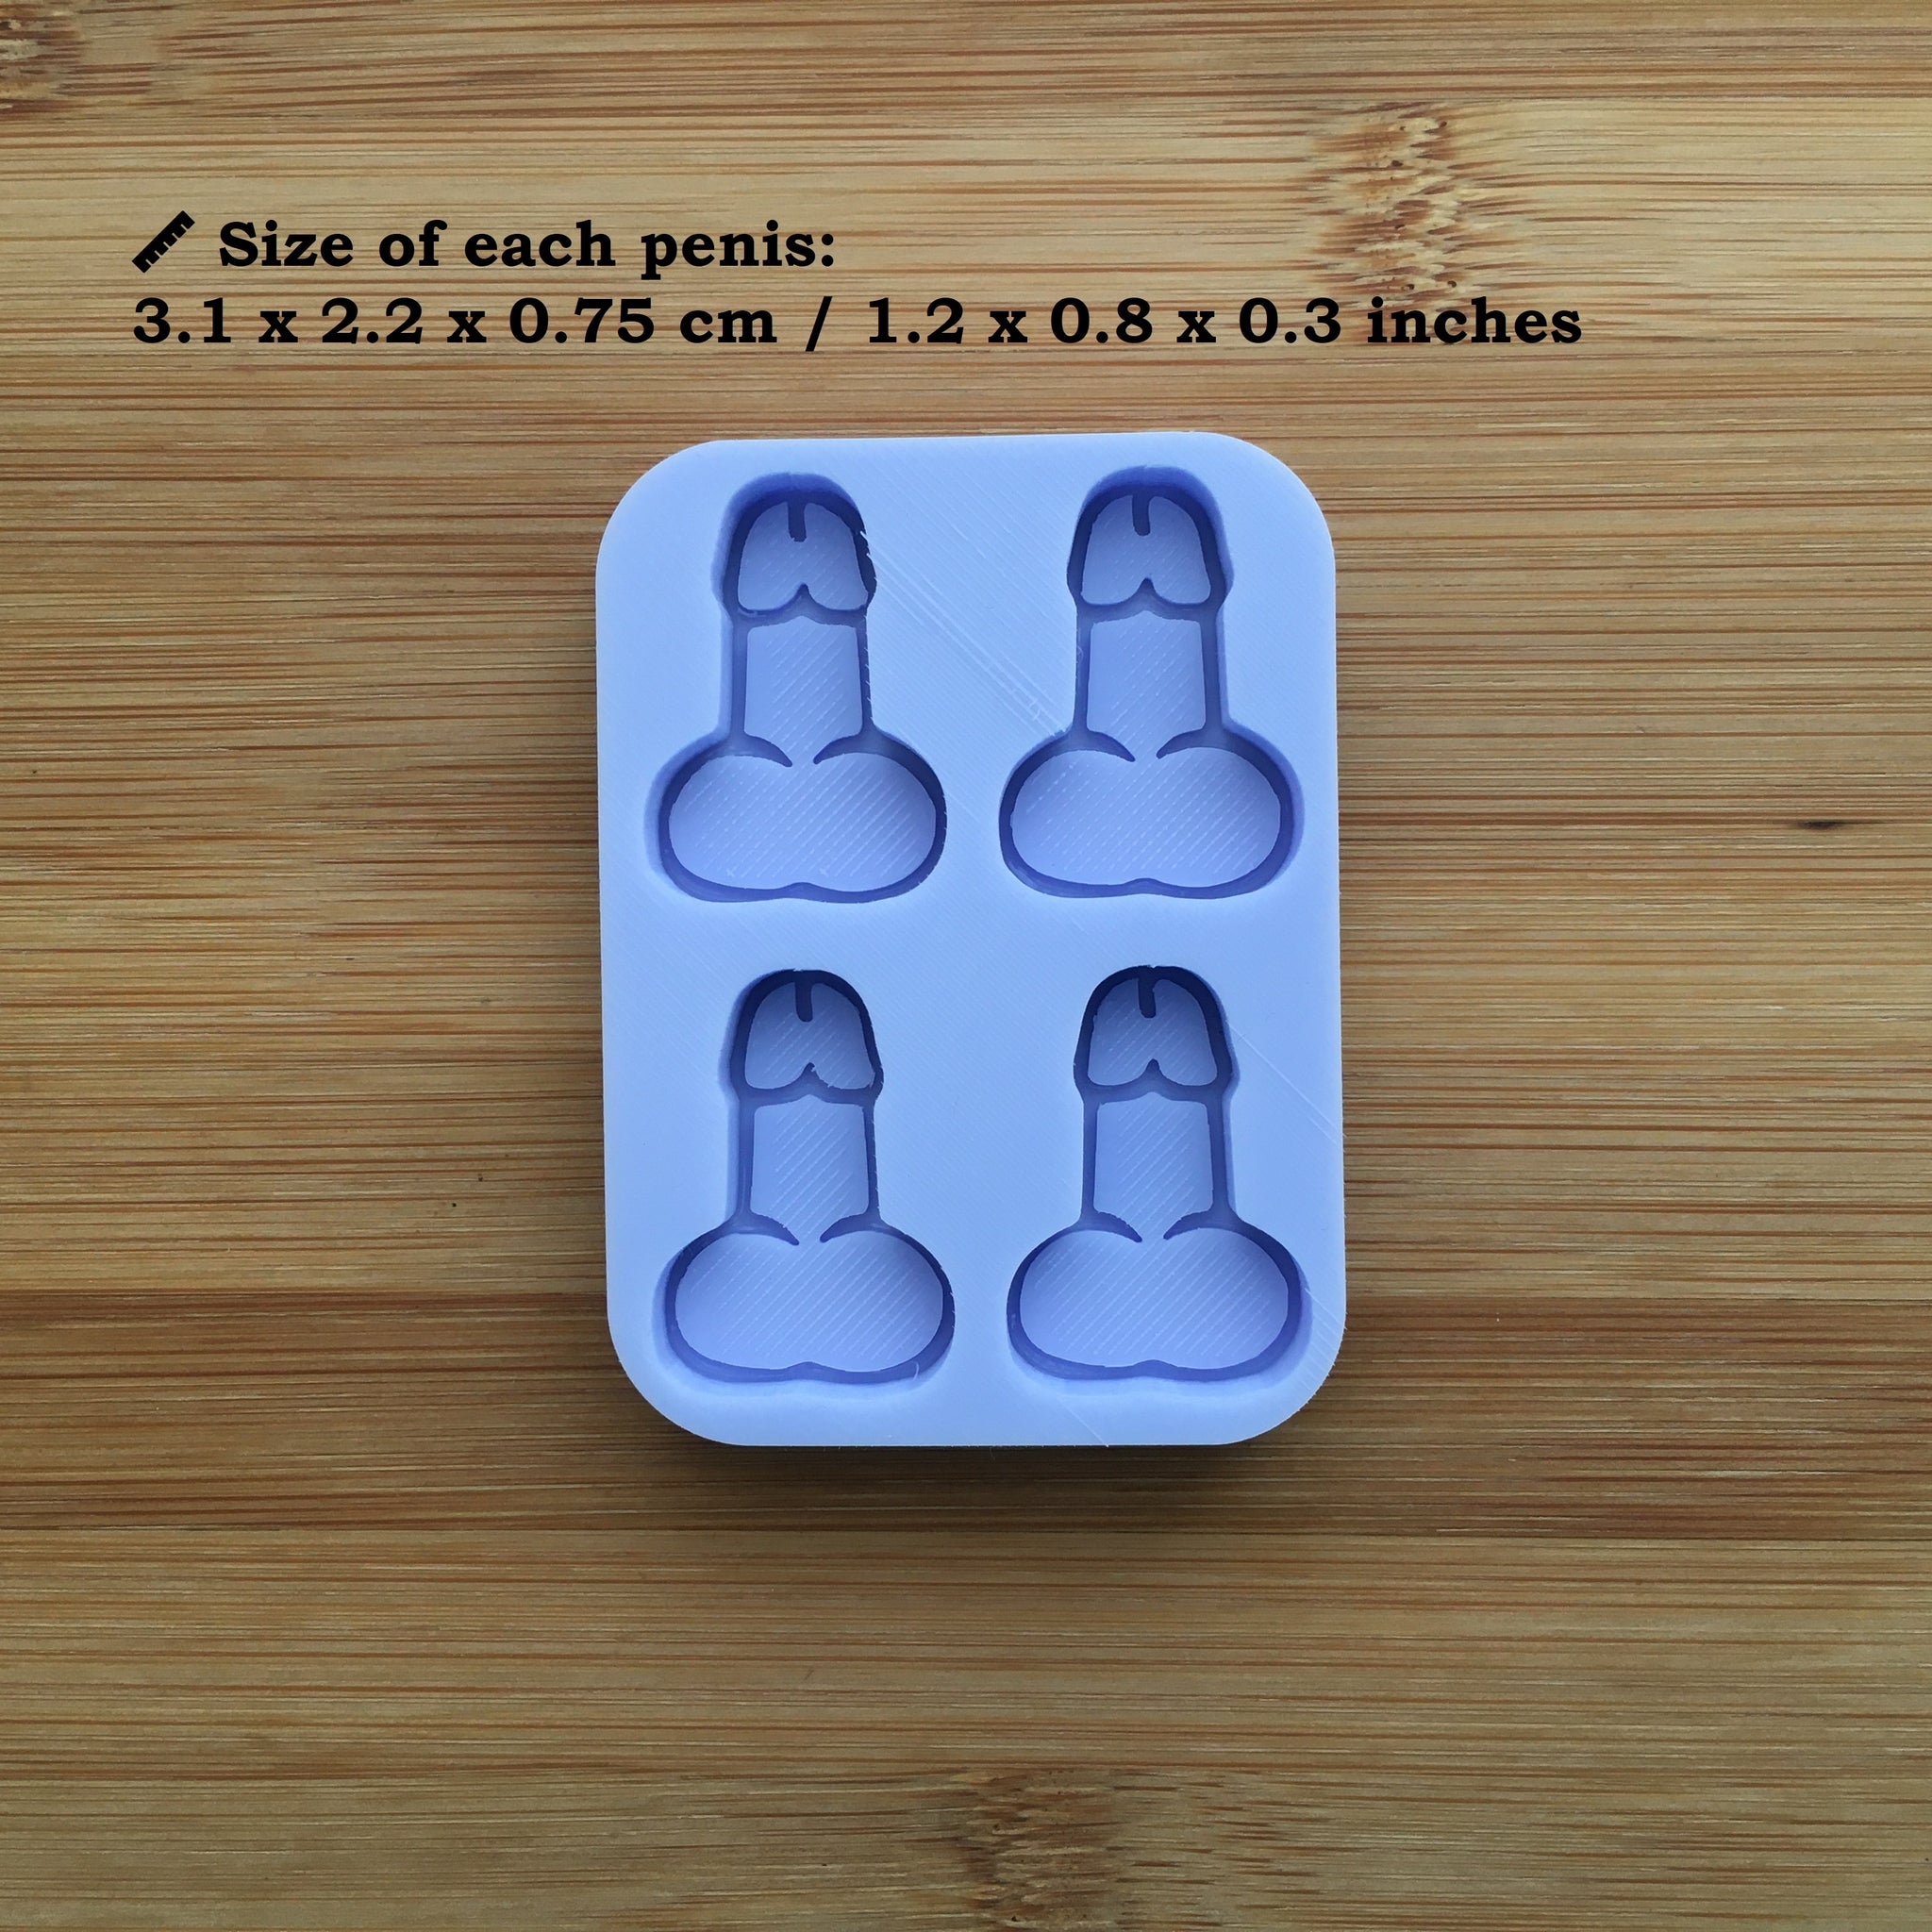 Small Boobs, Vagina & Penis Silicone Mold – The Crafts and Glitter Shop